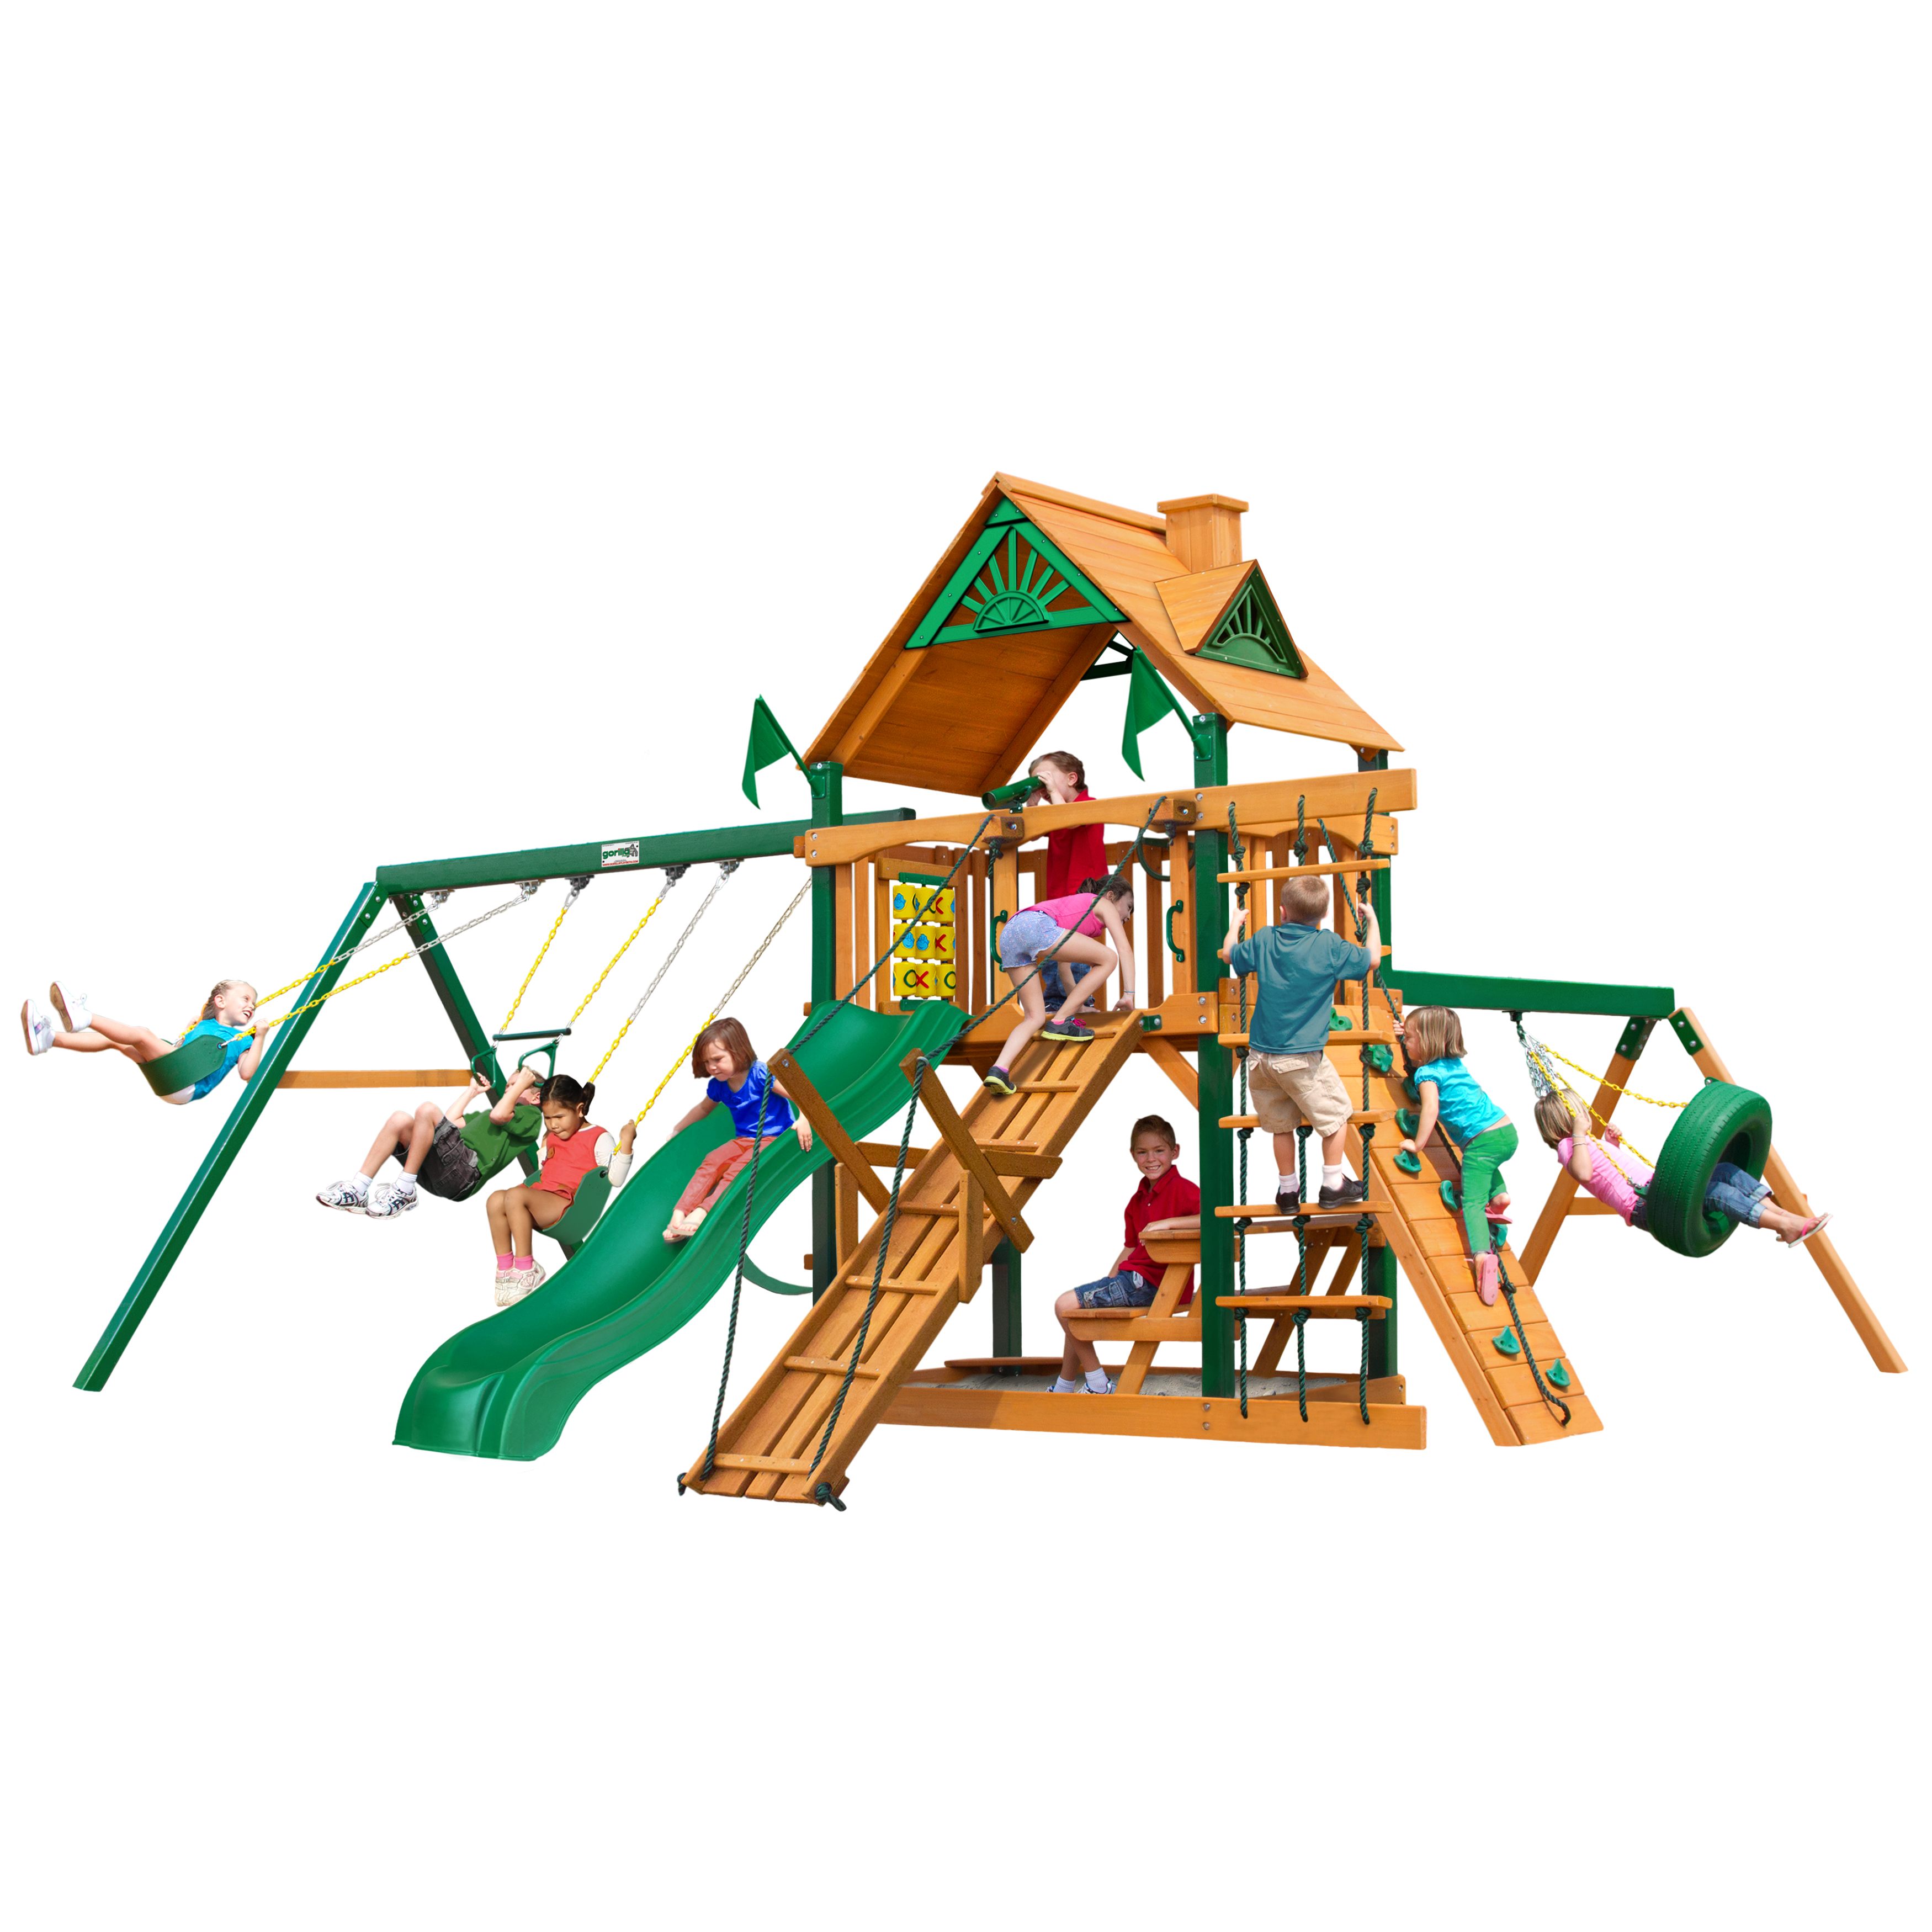 Gorilla Playsets Frontier Cedar Swing Set with Timber Shield Posts - image 1 of 8